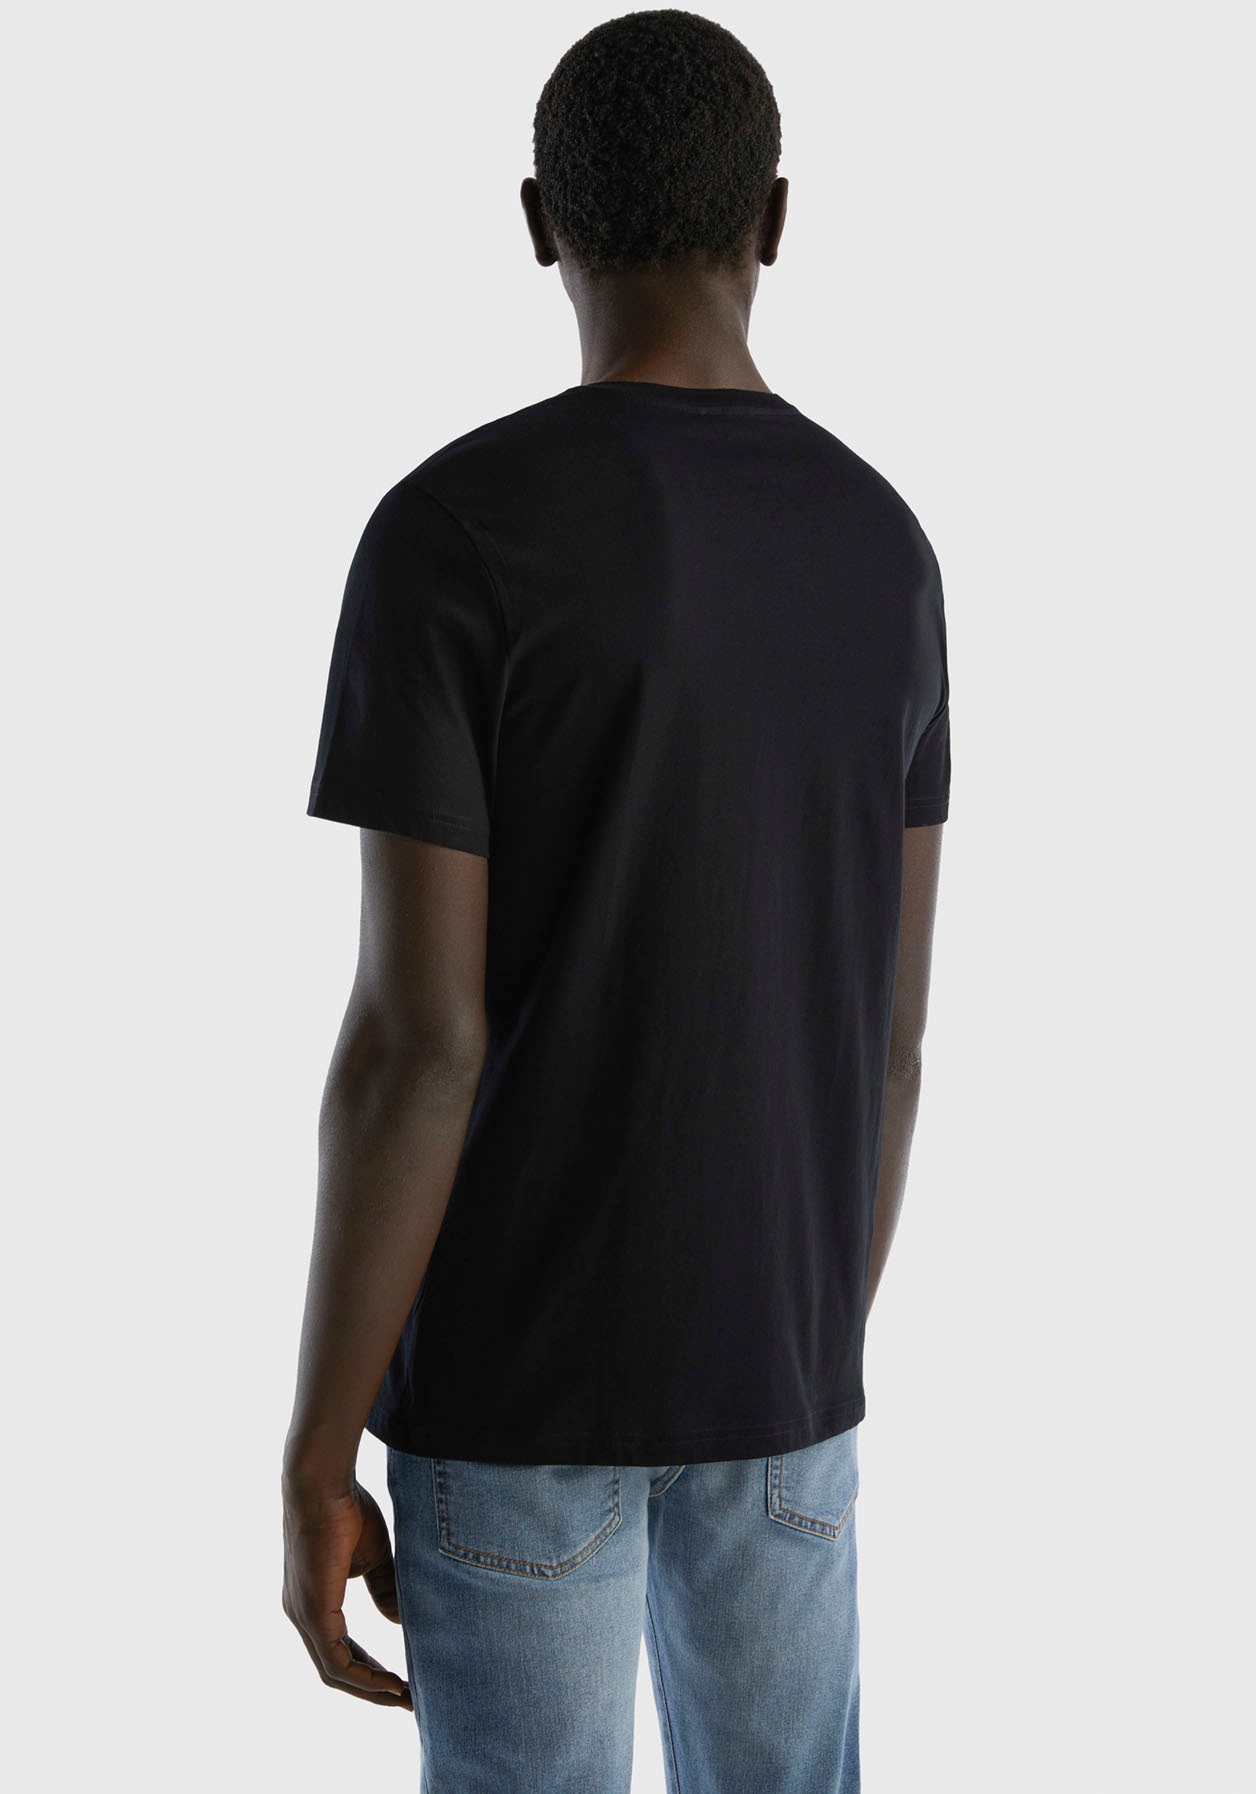 United Colors in online Benetton of Basic-Form shoppen bei OTTO T-Shirt, cleaner